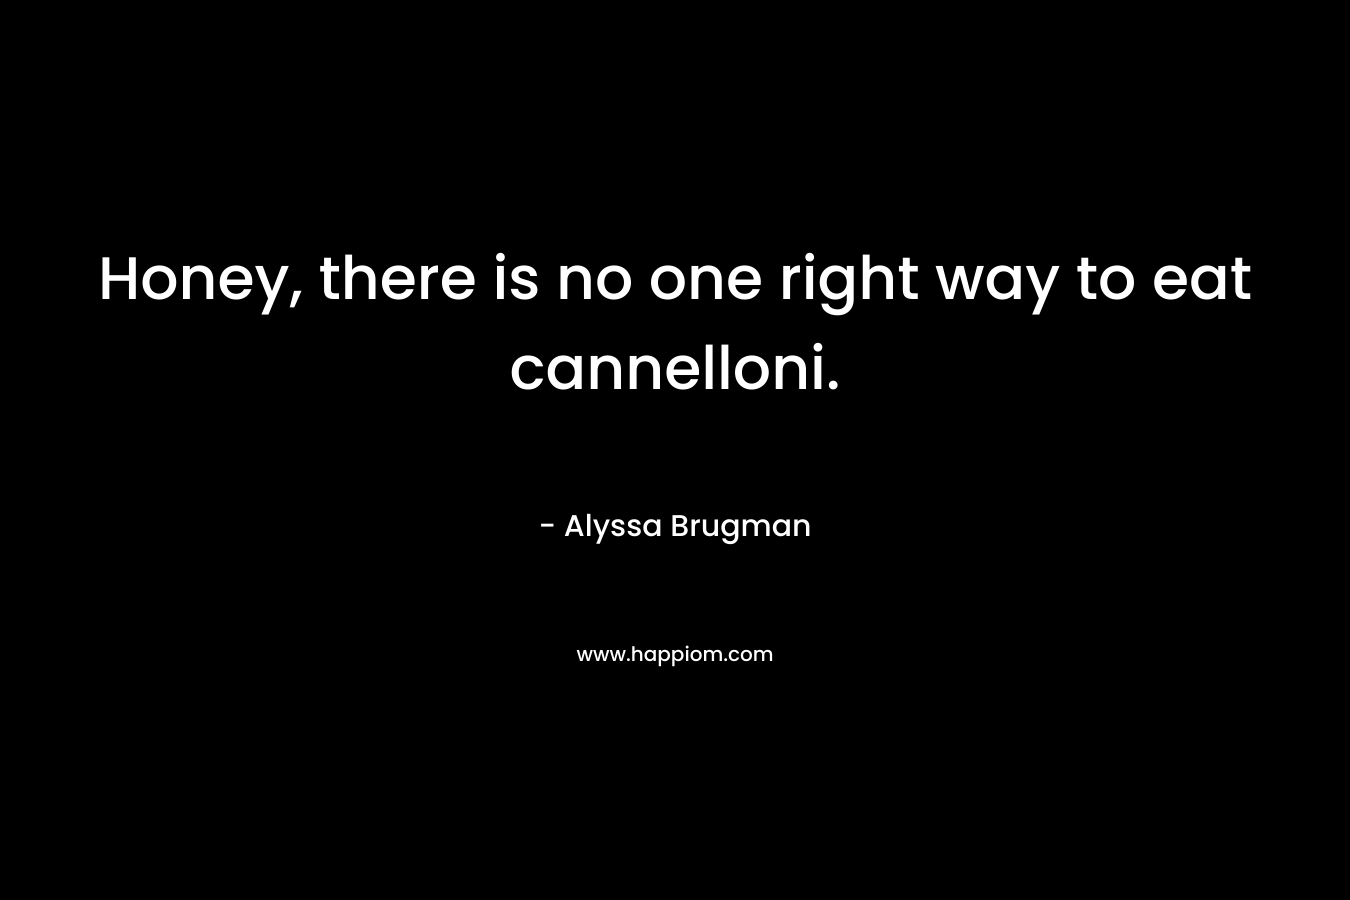 Honey, there is no one right way to eat cannelloni. – Alyssa Brugman